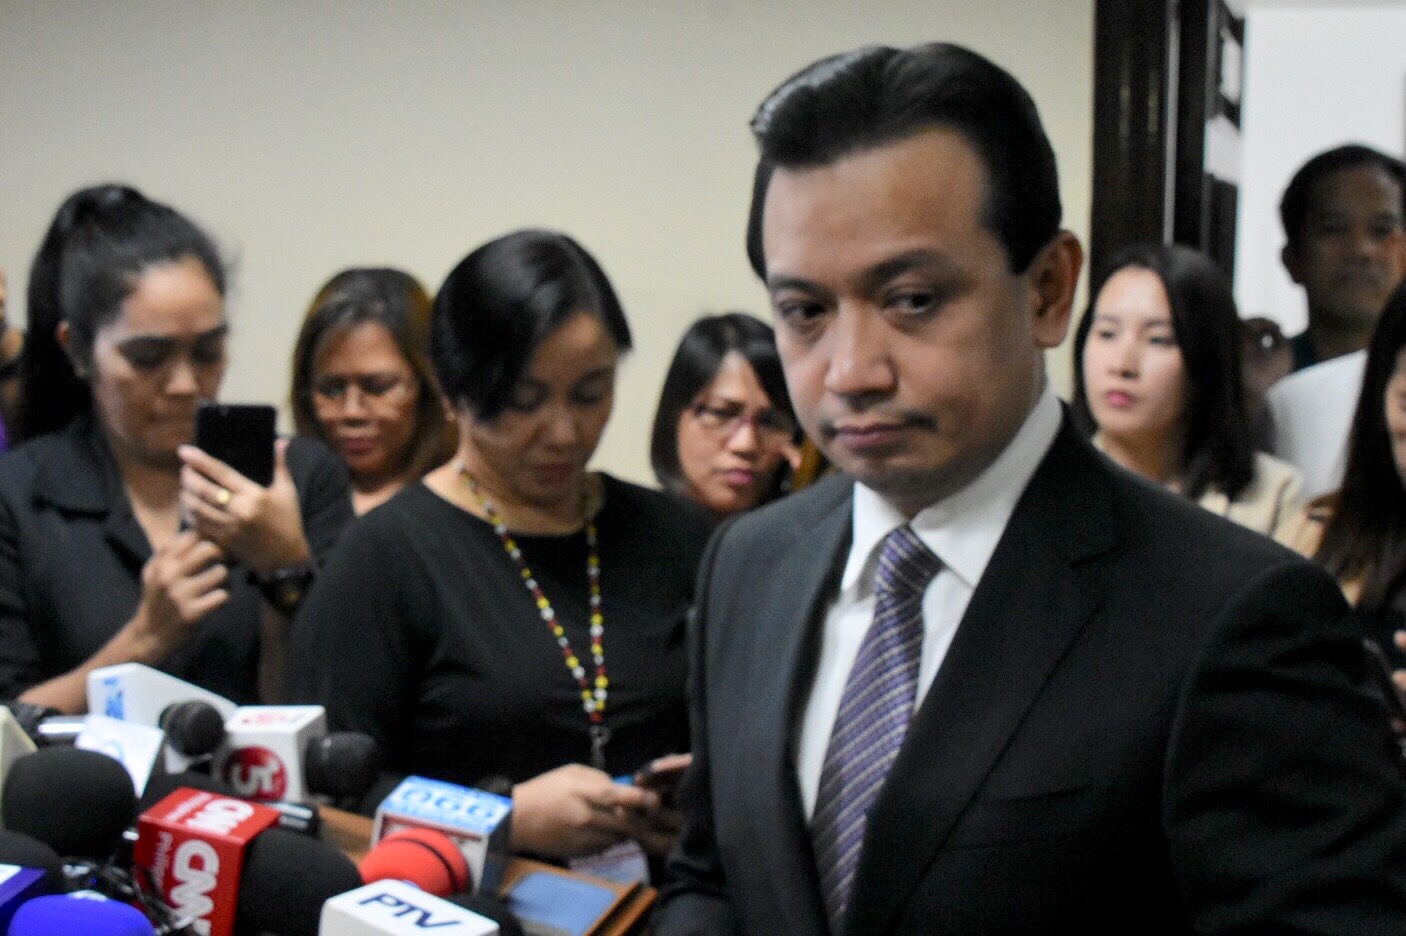 OPPOSITION SENATOR. Senator Antonio Trillanes IV faces arrest again after a Davao City court issues arrest warrants in connection with libel complaints filed by presidential son Paolo Duterte and presidential son-in-law Manases Carpio. File photo by Angie de Silva/Rappler 